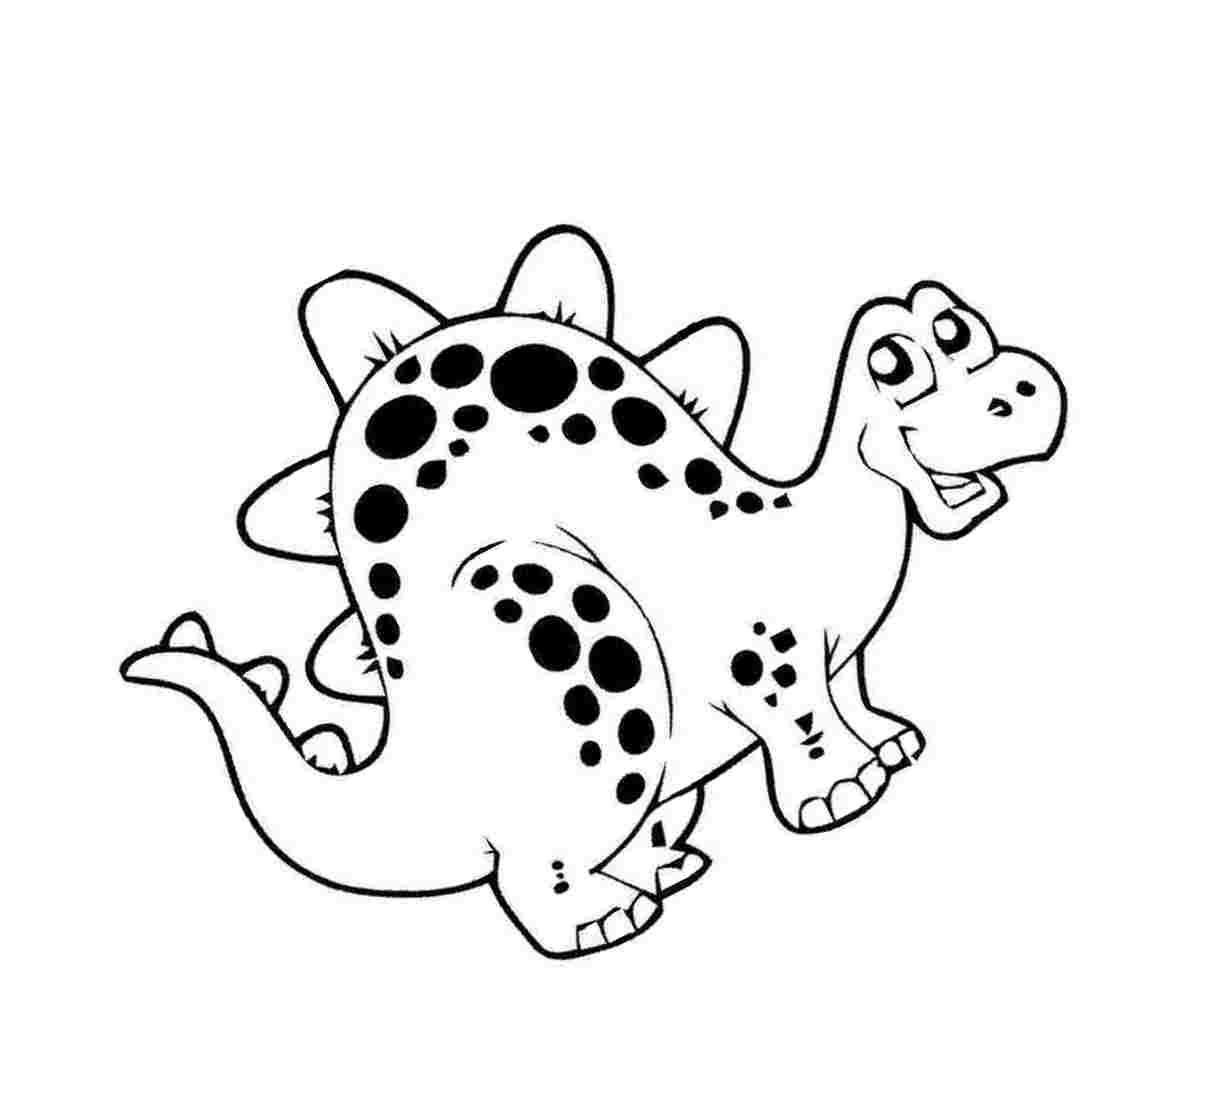 dinosaur coloring pages for kids - Site about Children